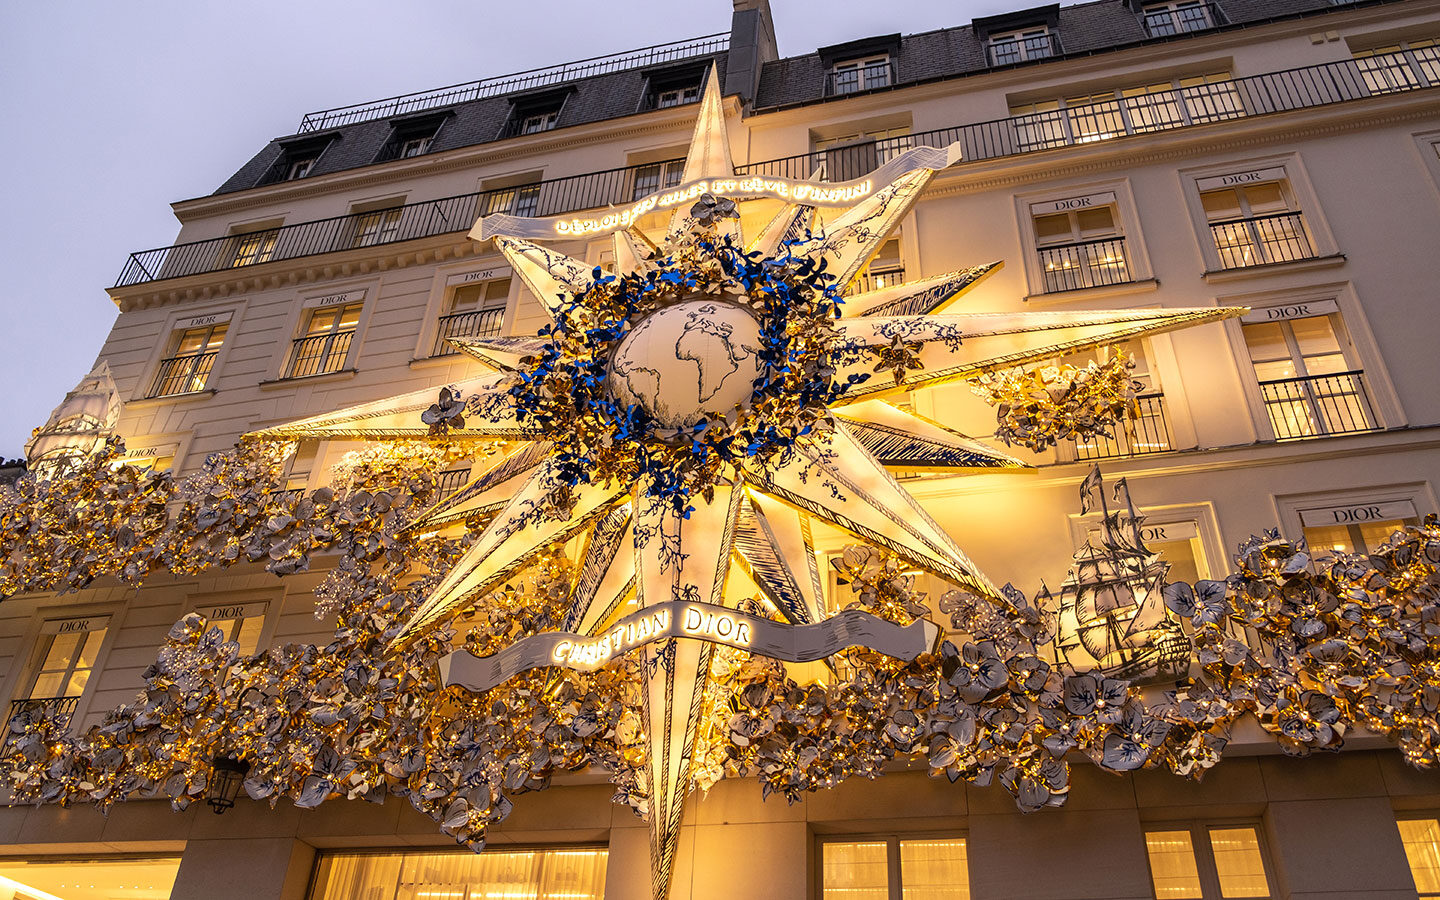 Decorations at the Christian Dior shop on Rue du Faubourg-St-Honoré